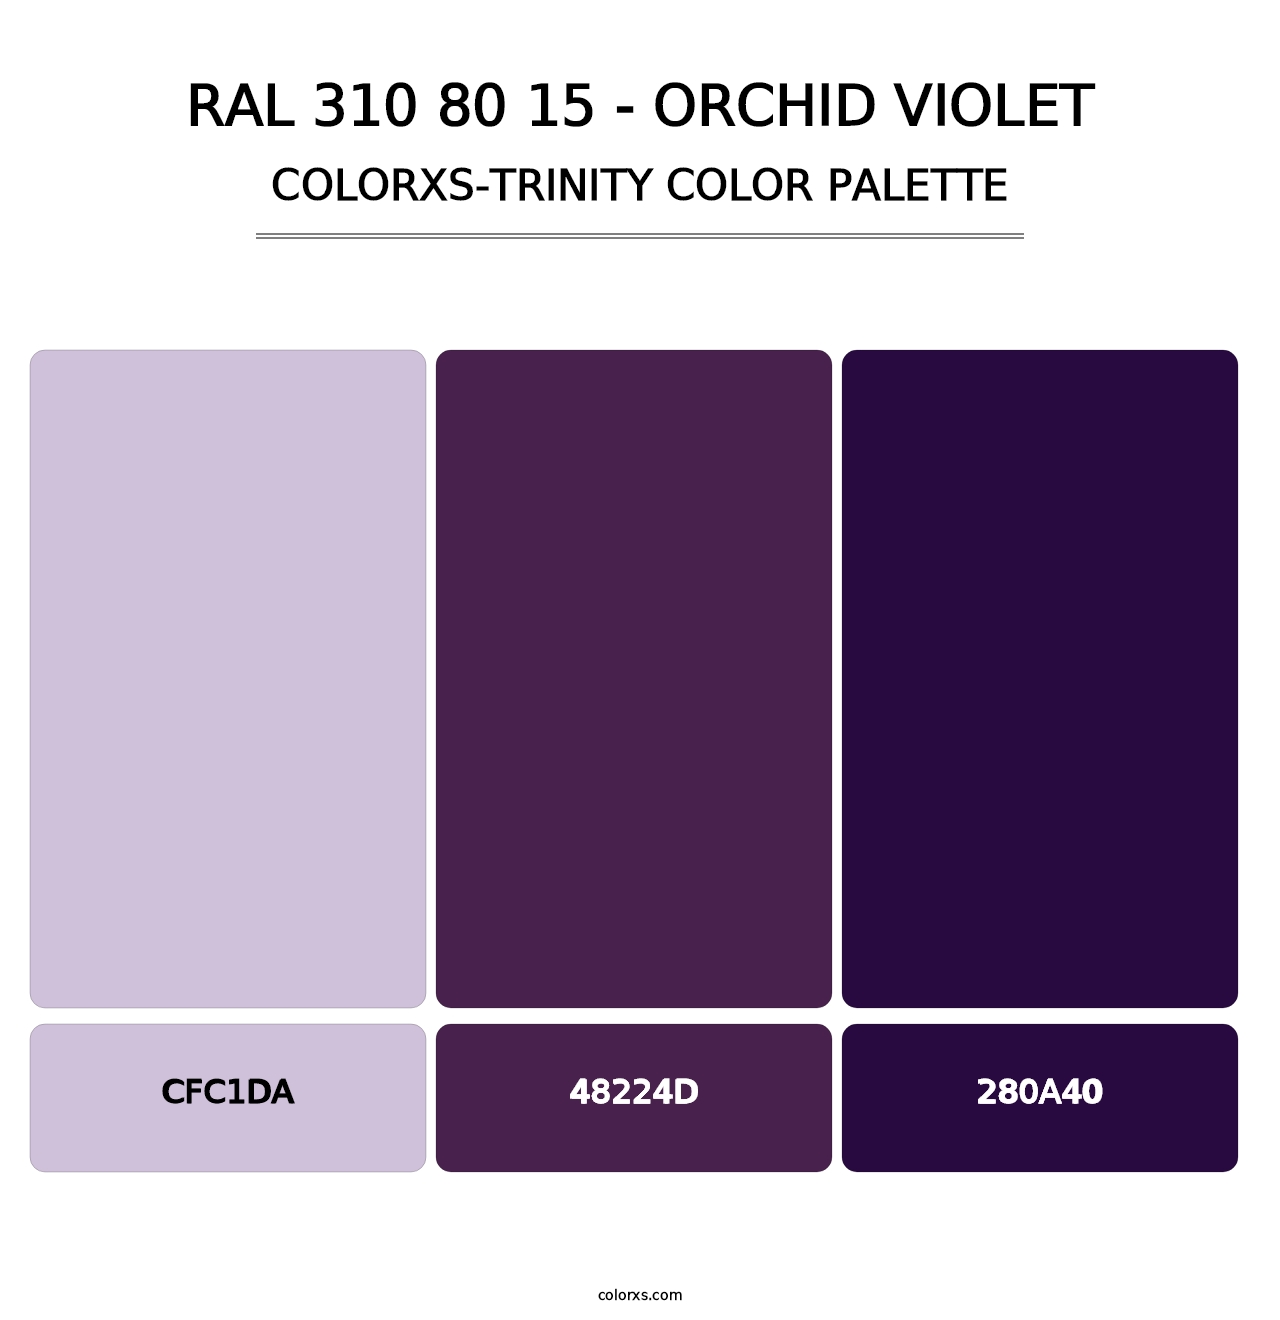 RAL 310 80 15 - Orchid Violet - Colorxs Trinity Palette